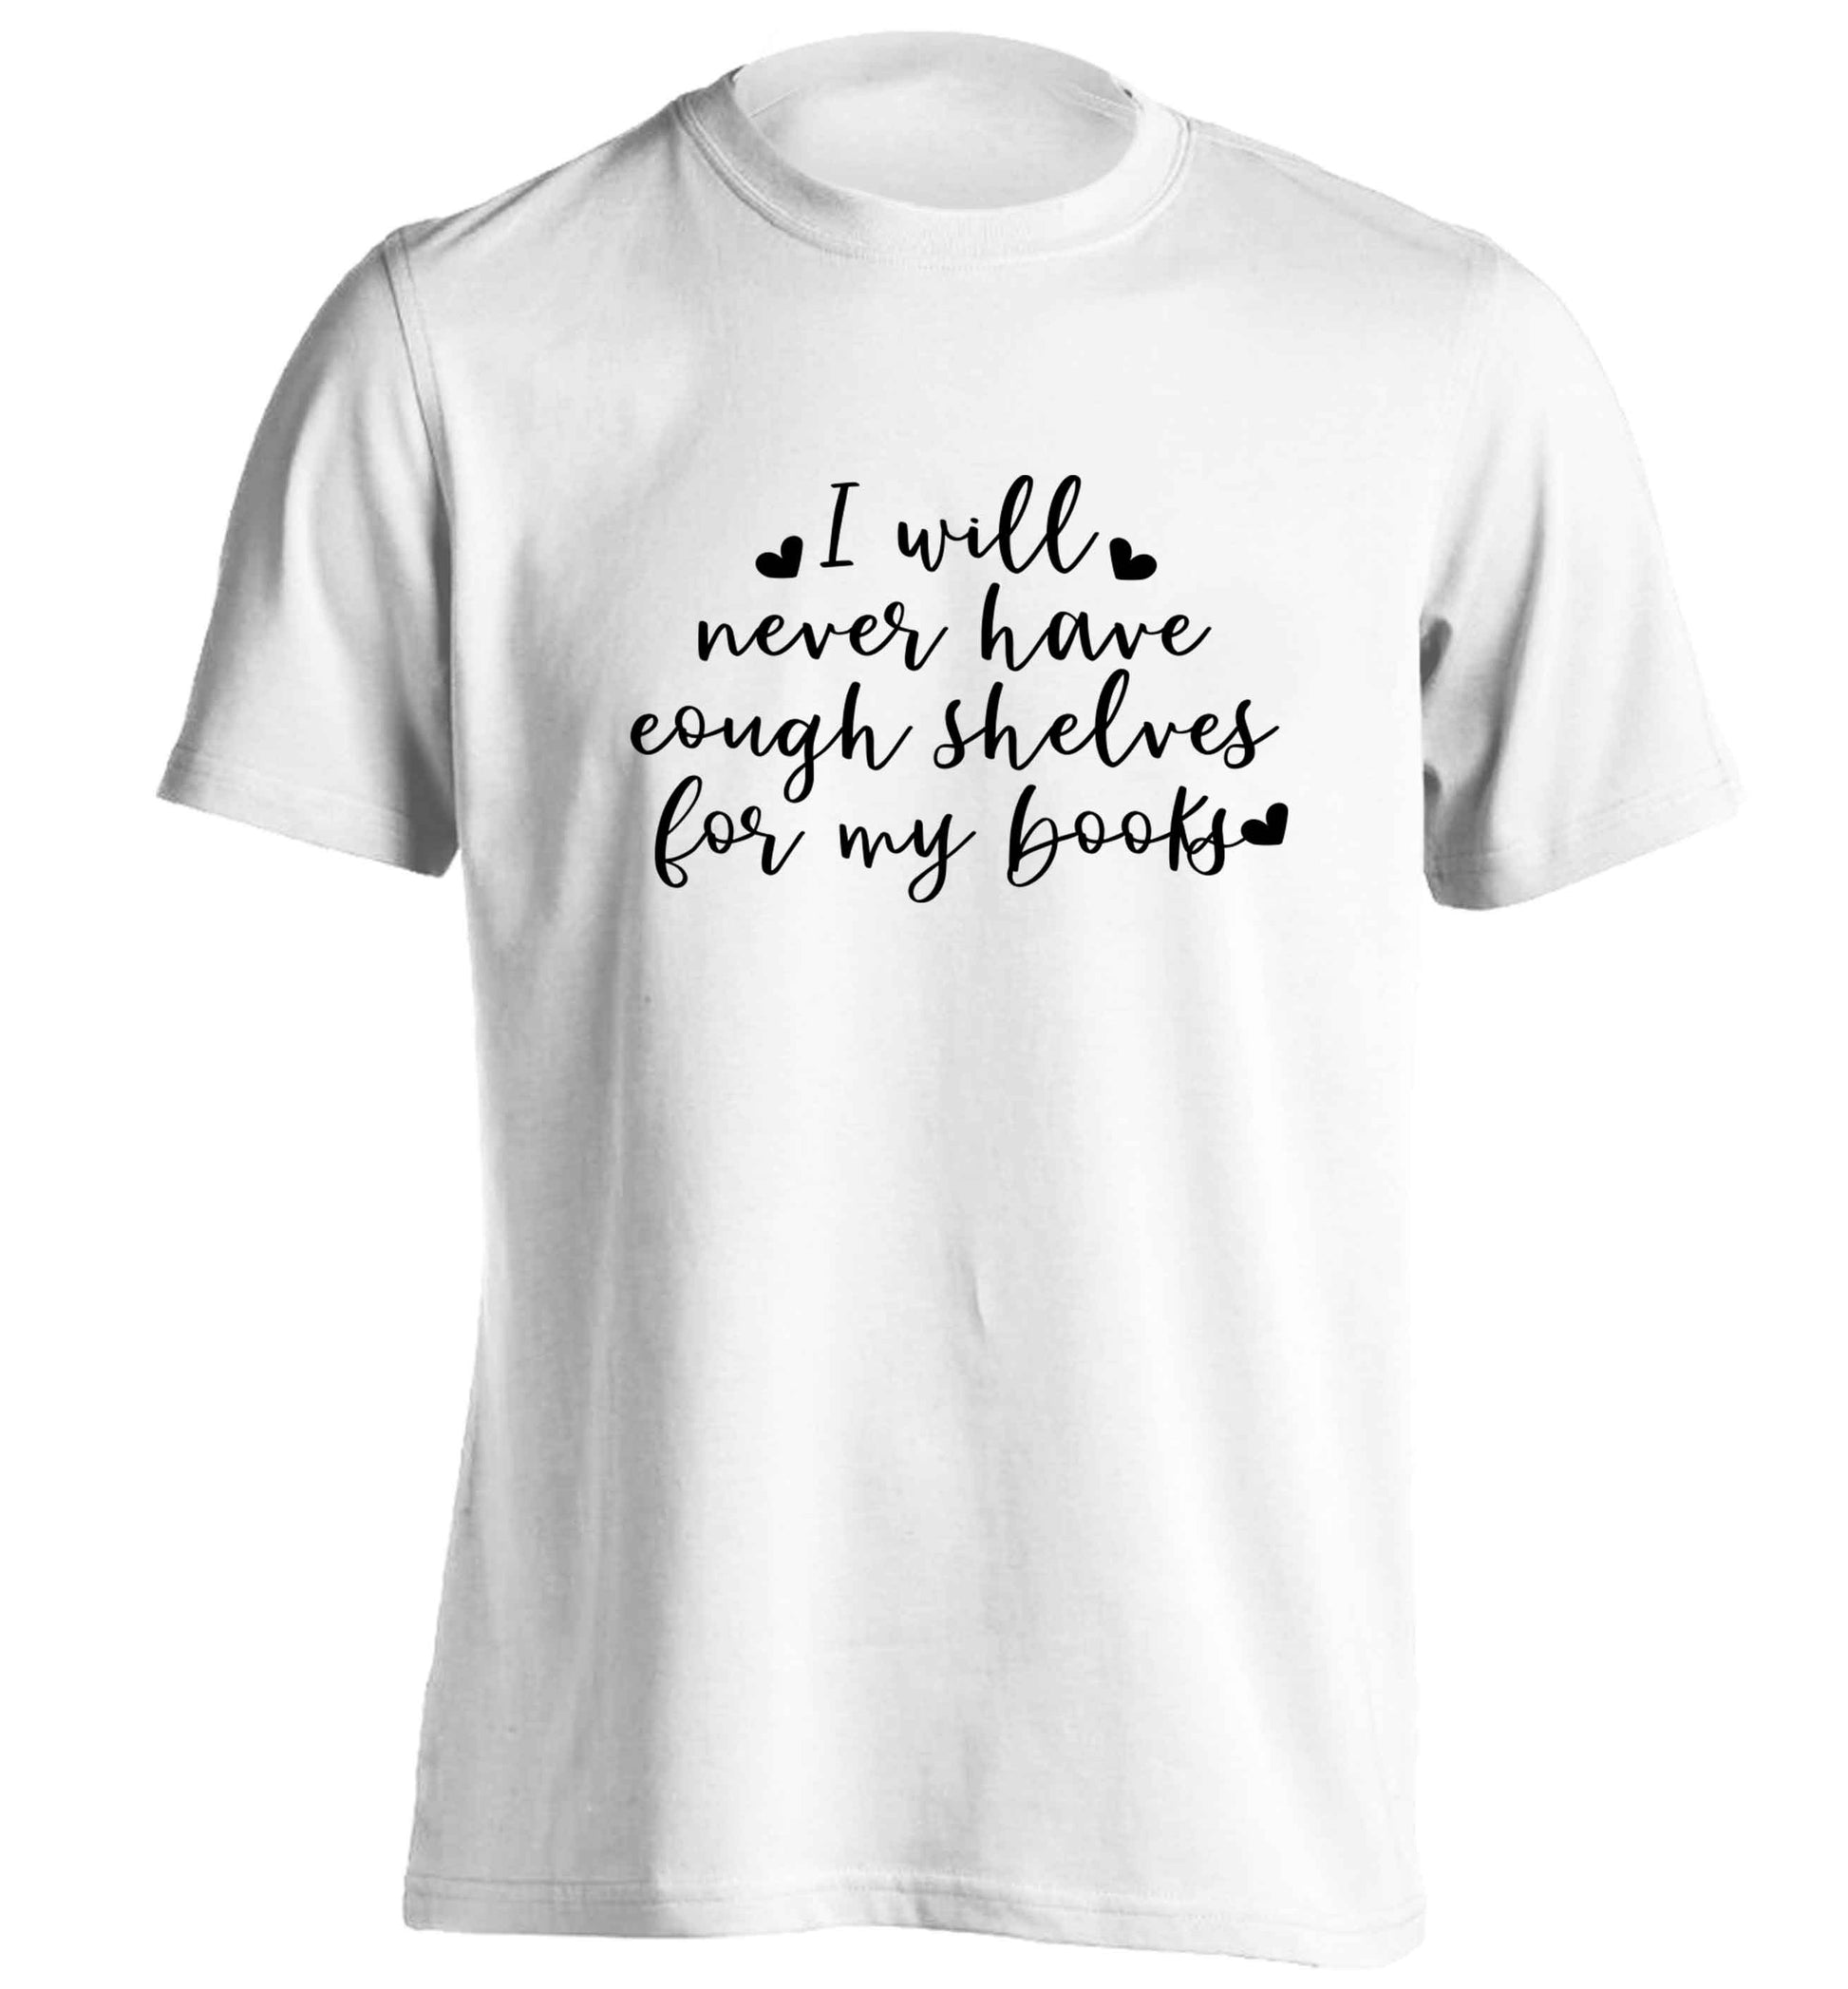 I will never have enough shelves for my books adults unisex white Tshirt 2XL